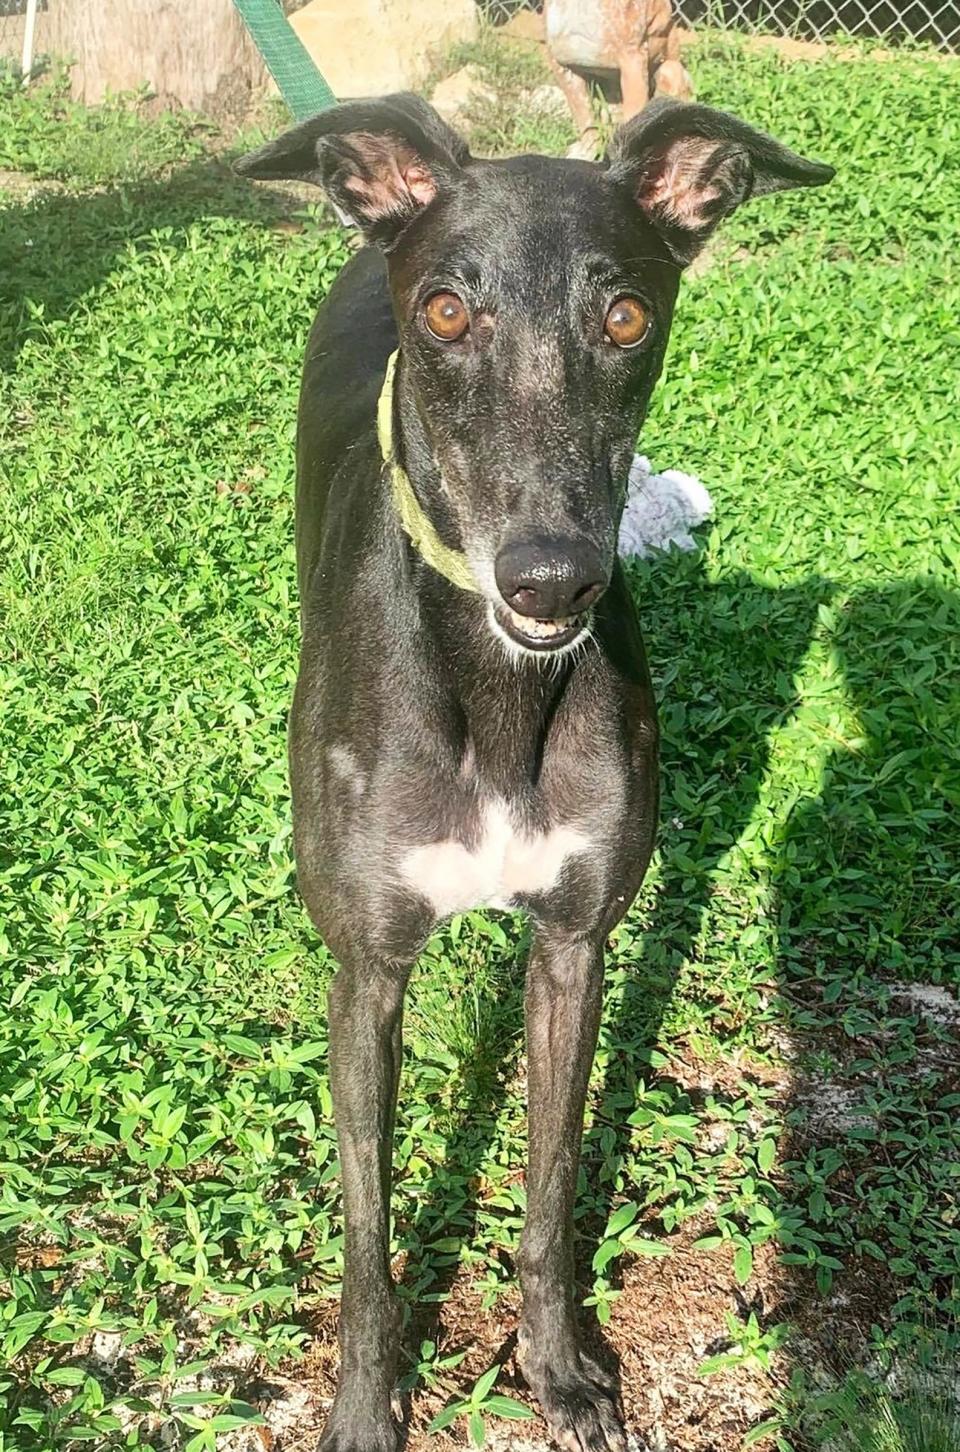 Fiesta is one of the greyhounds that Audrey Tezyk adopted from Hollydogs. Tezyk says she loves the friendly dog she adopted in September 2020.